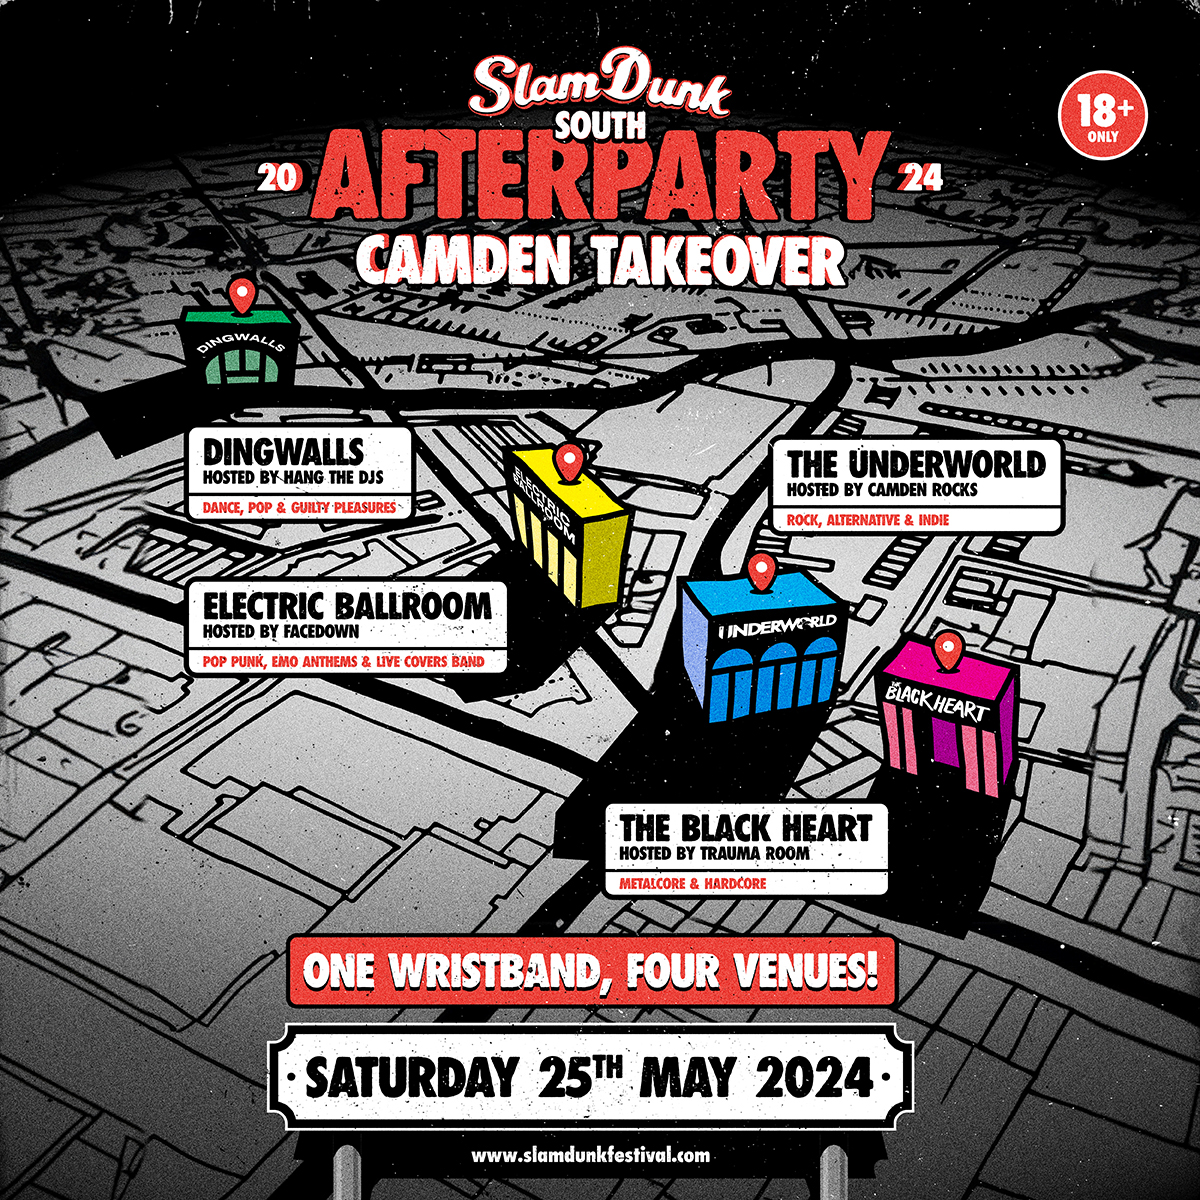 - @SlamDunkMusic are coming to town! Saturday 25th May, they'll be co-hosting their after party with us down in @TheUnderworld, as well as at three other legendary venues. One wristband to rule them all: slamdunkfestival.com Or purchase tickets via the usual routes 💥⚡️